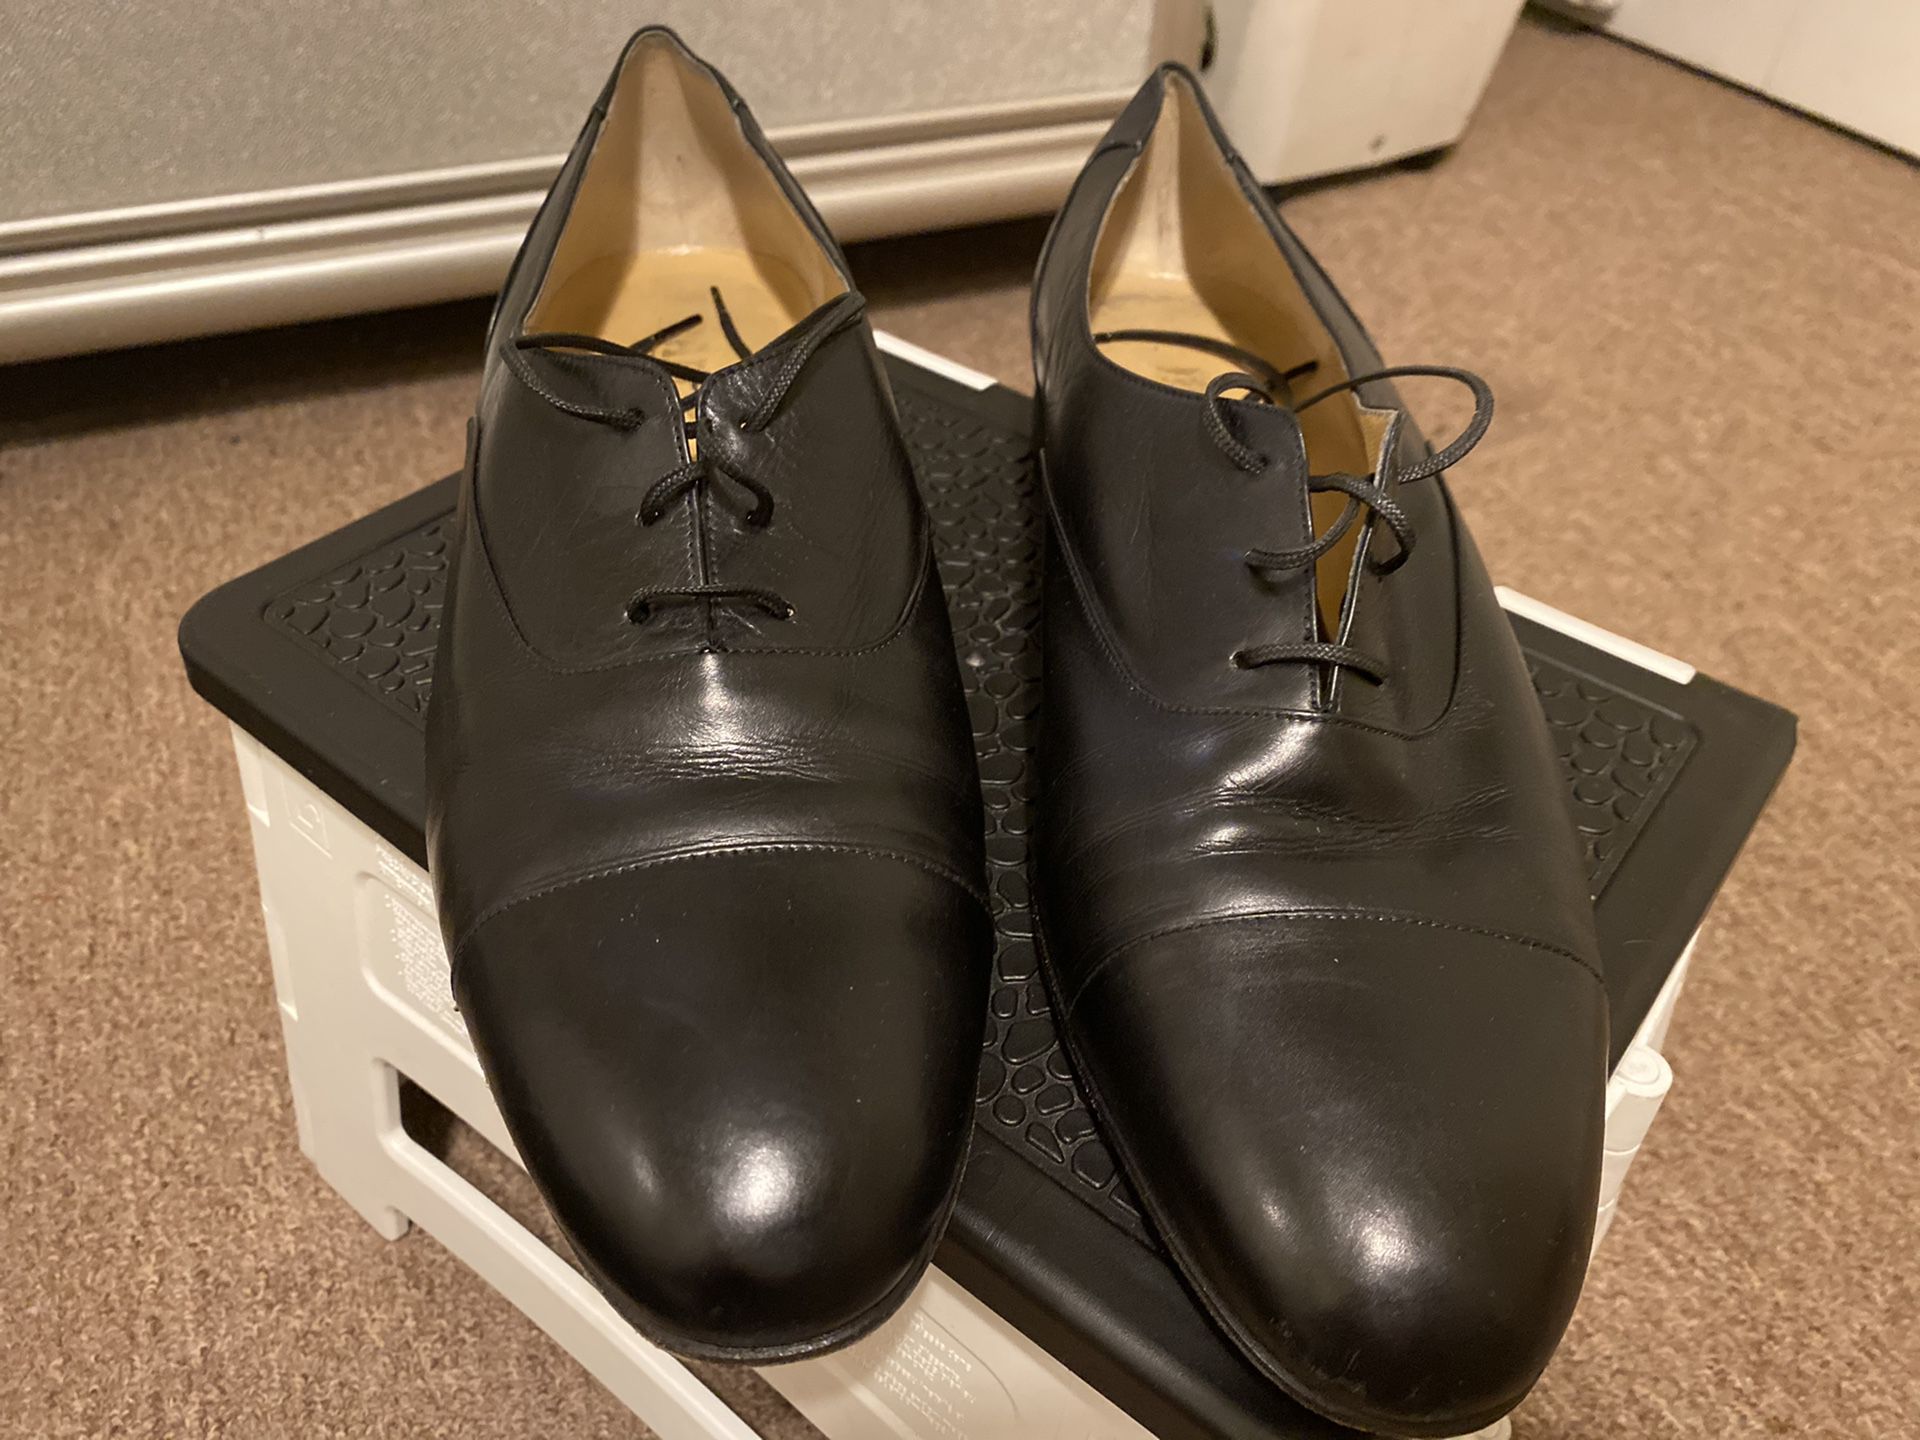 BALLY Italian made shoe, very classic, very old school in great condition